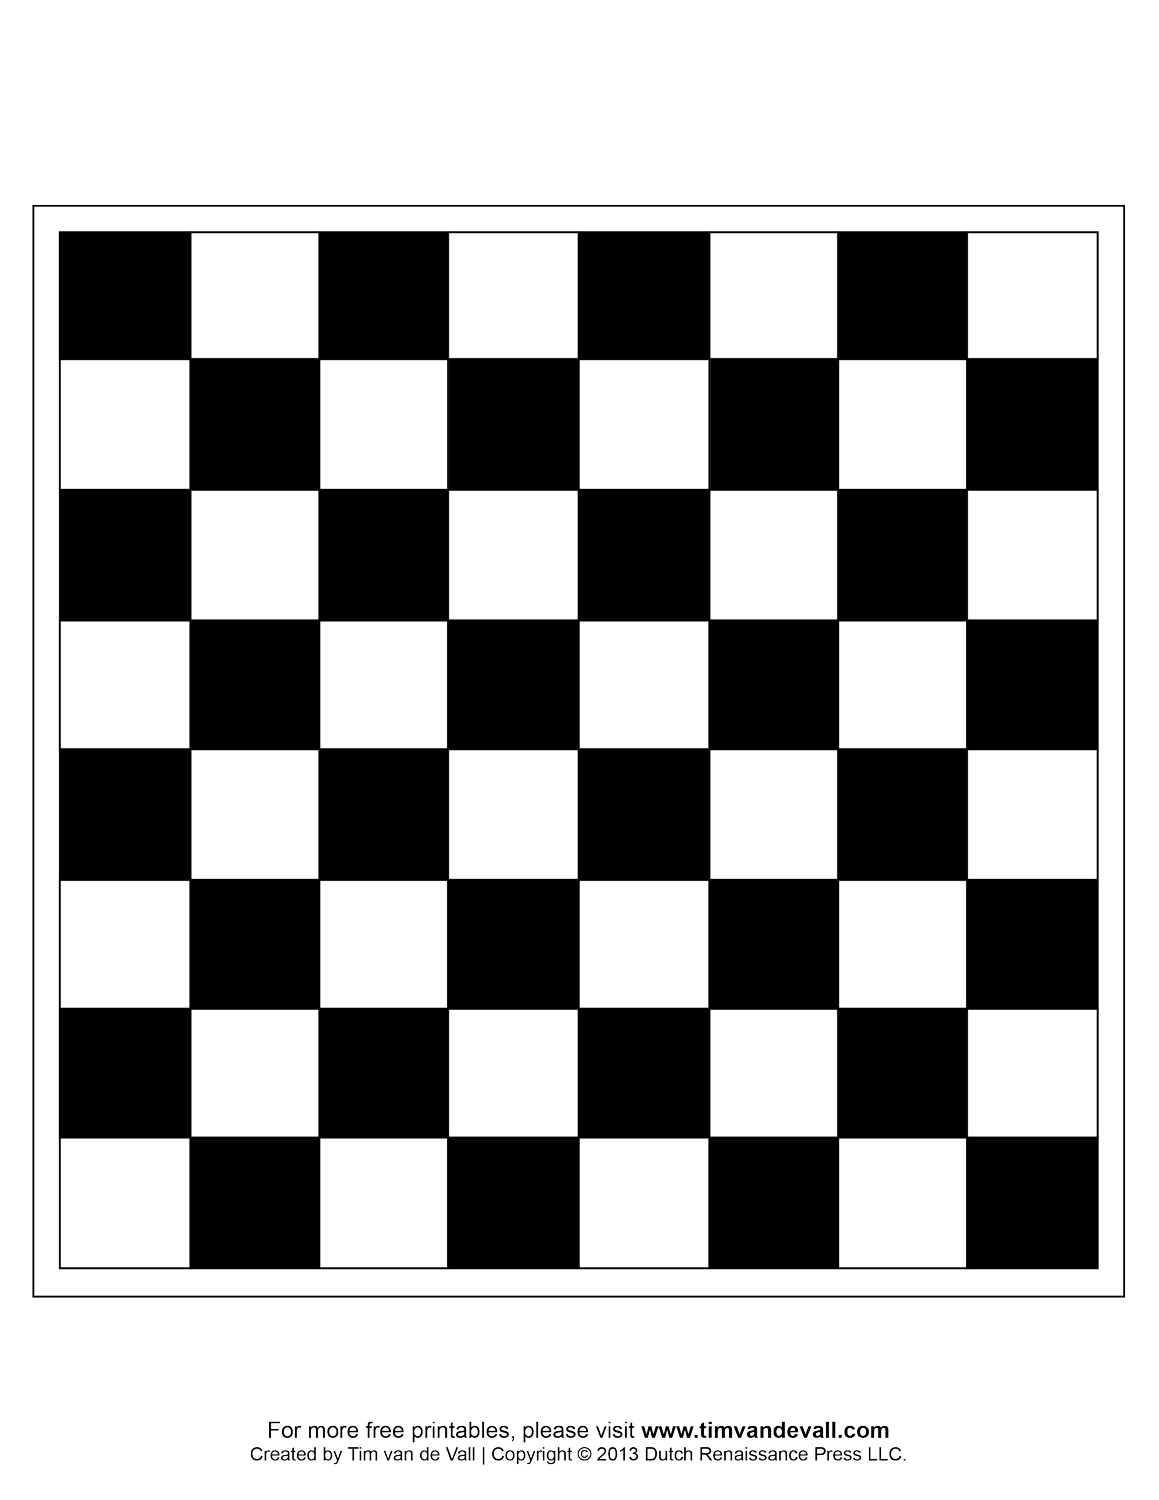 Free Printable Chess Boards And Chess Pieces For Kids